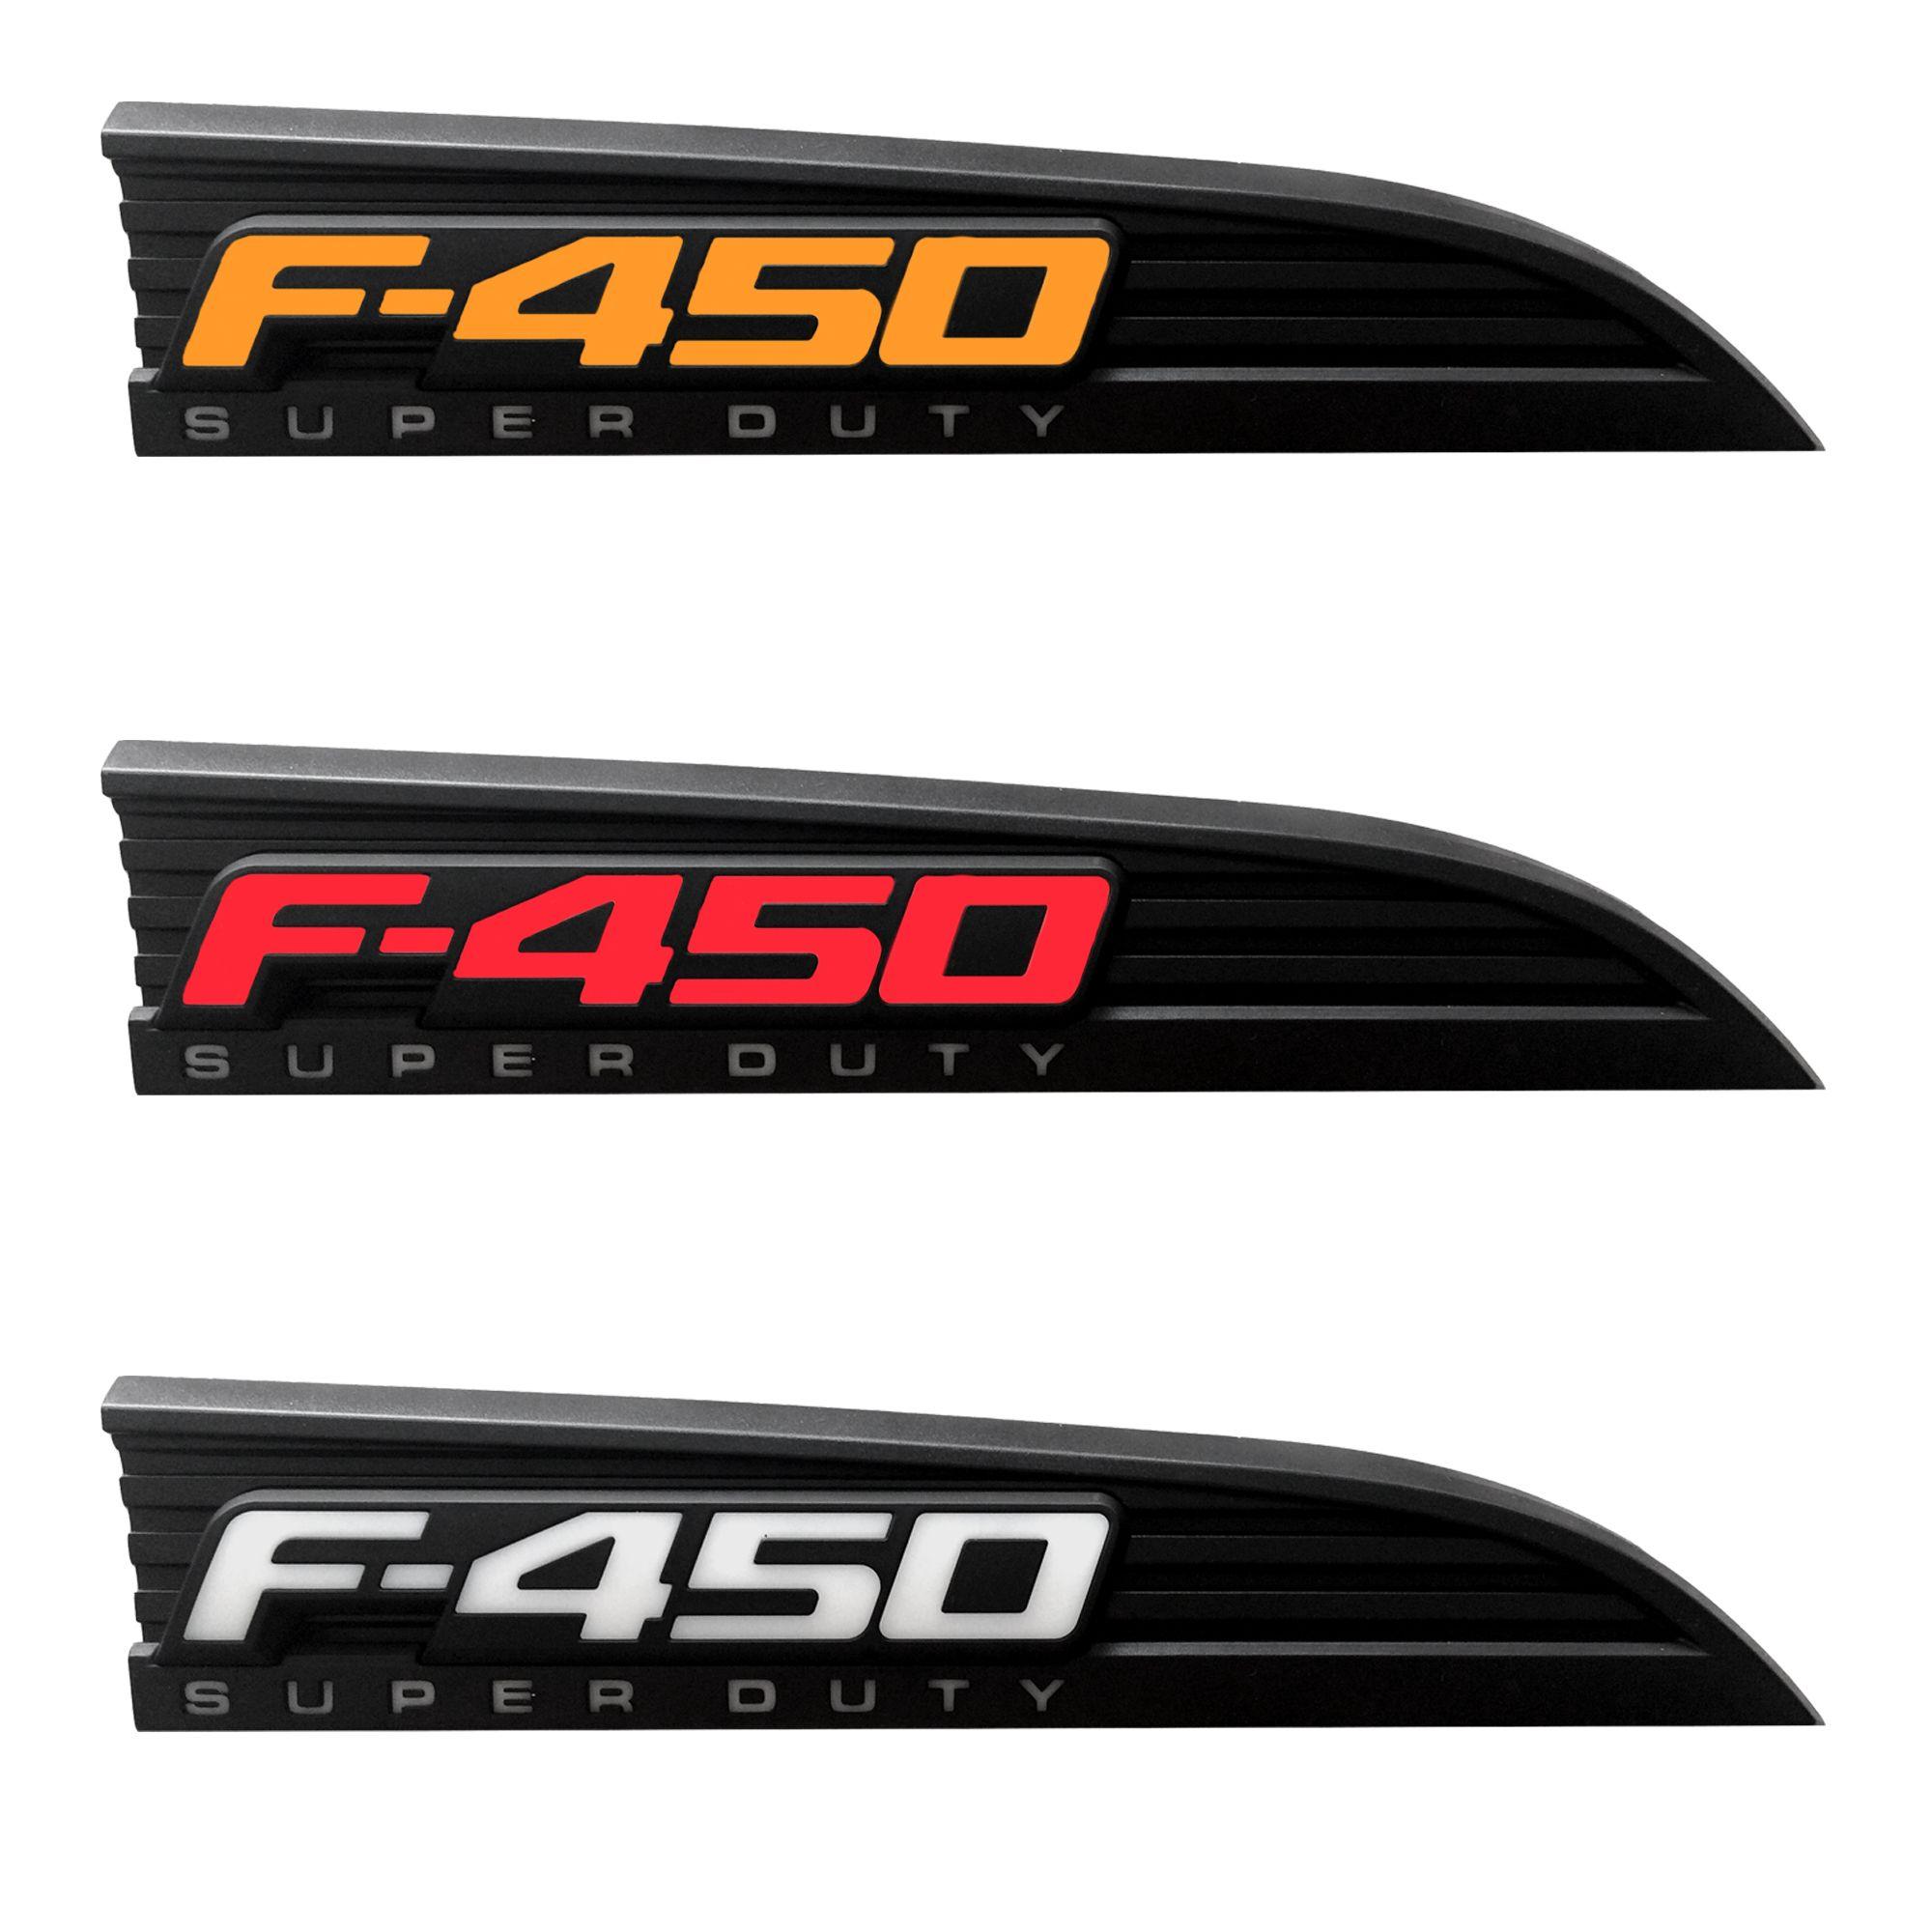 F-450 Logo - RECON 264482BK 11 16 Ford F450 Illuminated Emblems 2 Piece Kit Includes Driver & Passenger Side Fender Emblems In Black Chrome In 3